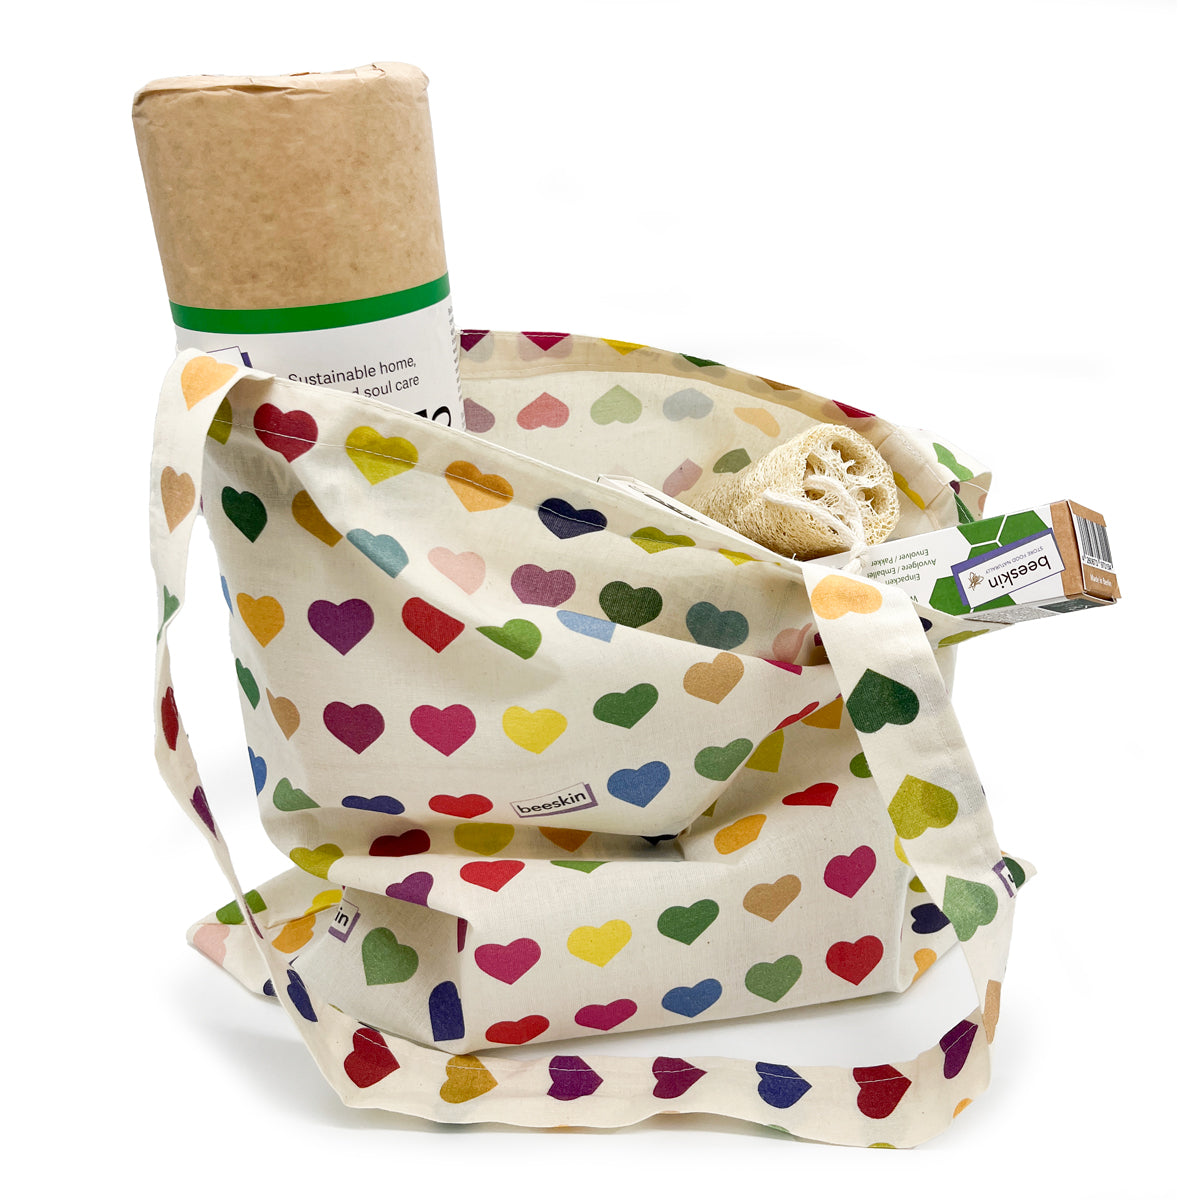 beeskin cotton shopping bag colorful hearts filled with bamboo roll, beeswax roll, loofah